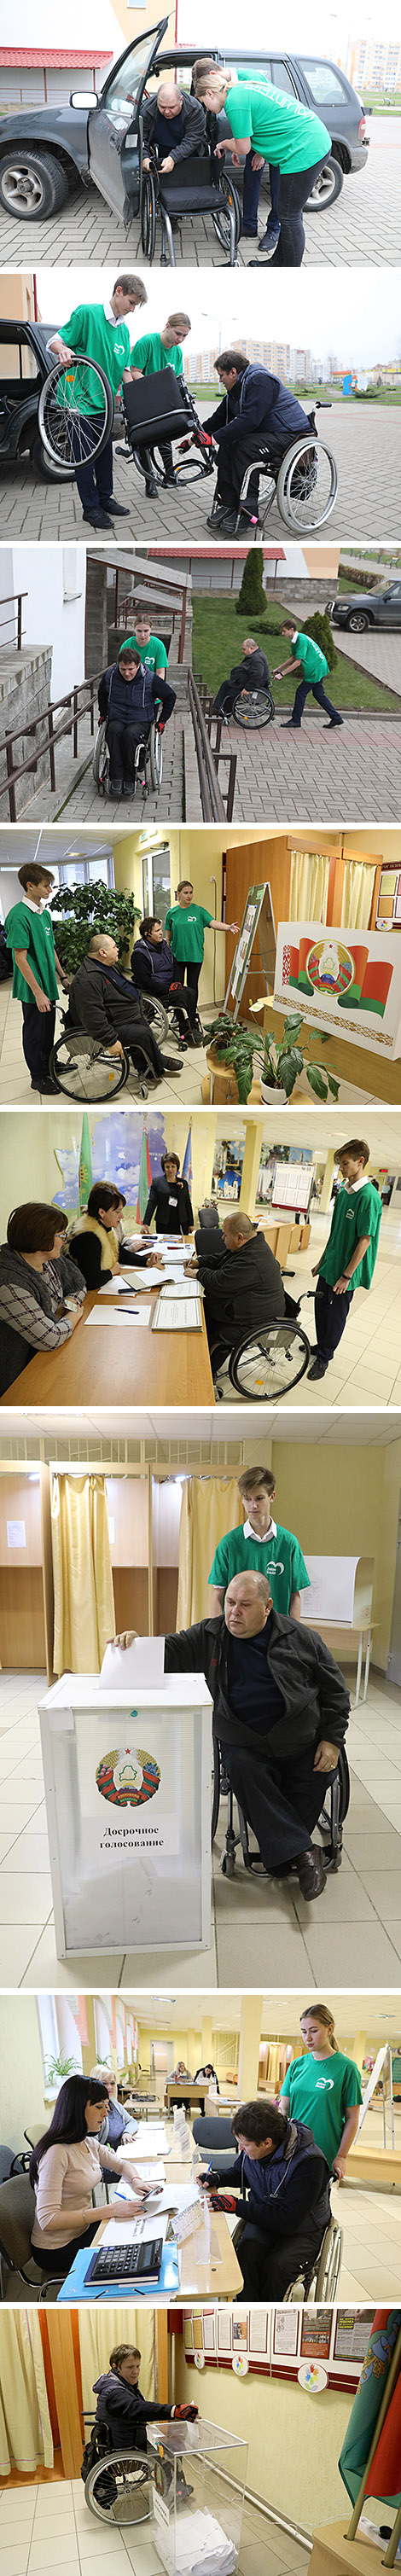 BRSM volunteers help people with disabilities at polling stations